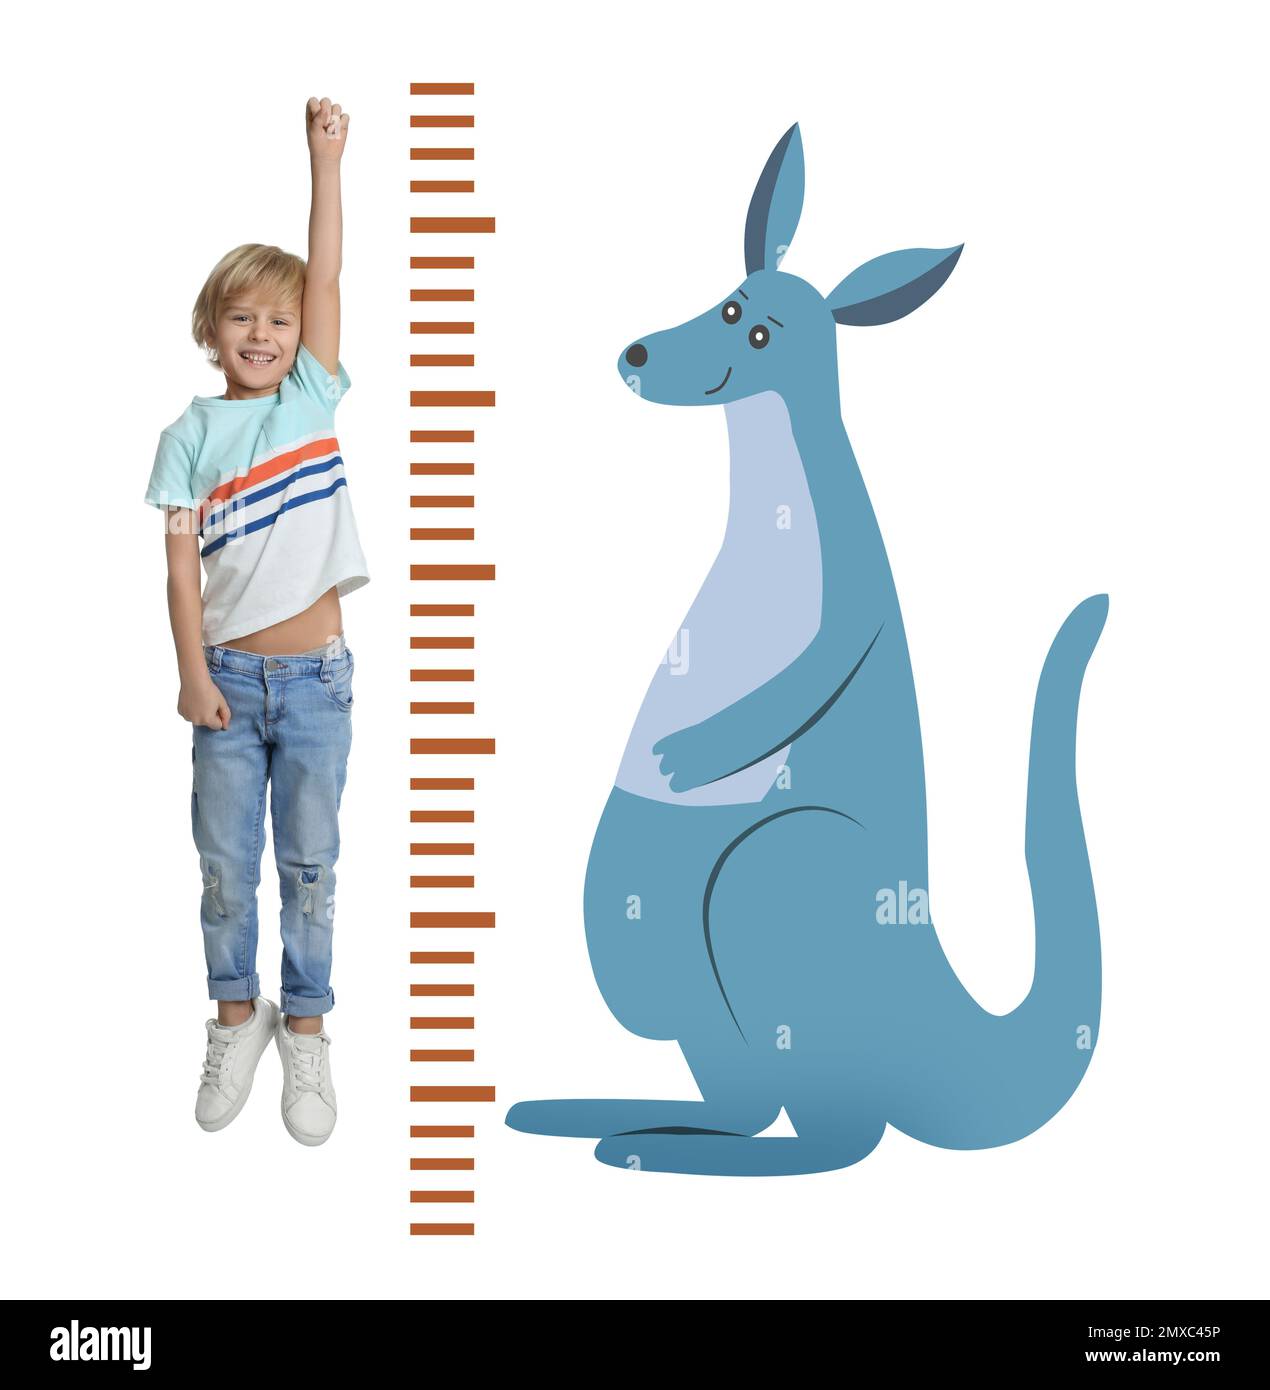 Little boy measuring height and drawing of kangaroo on white background Stock Photo